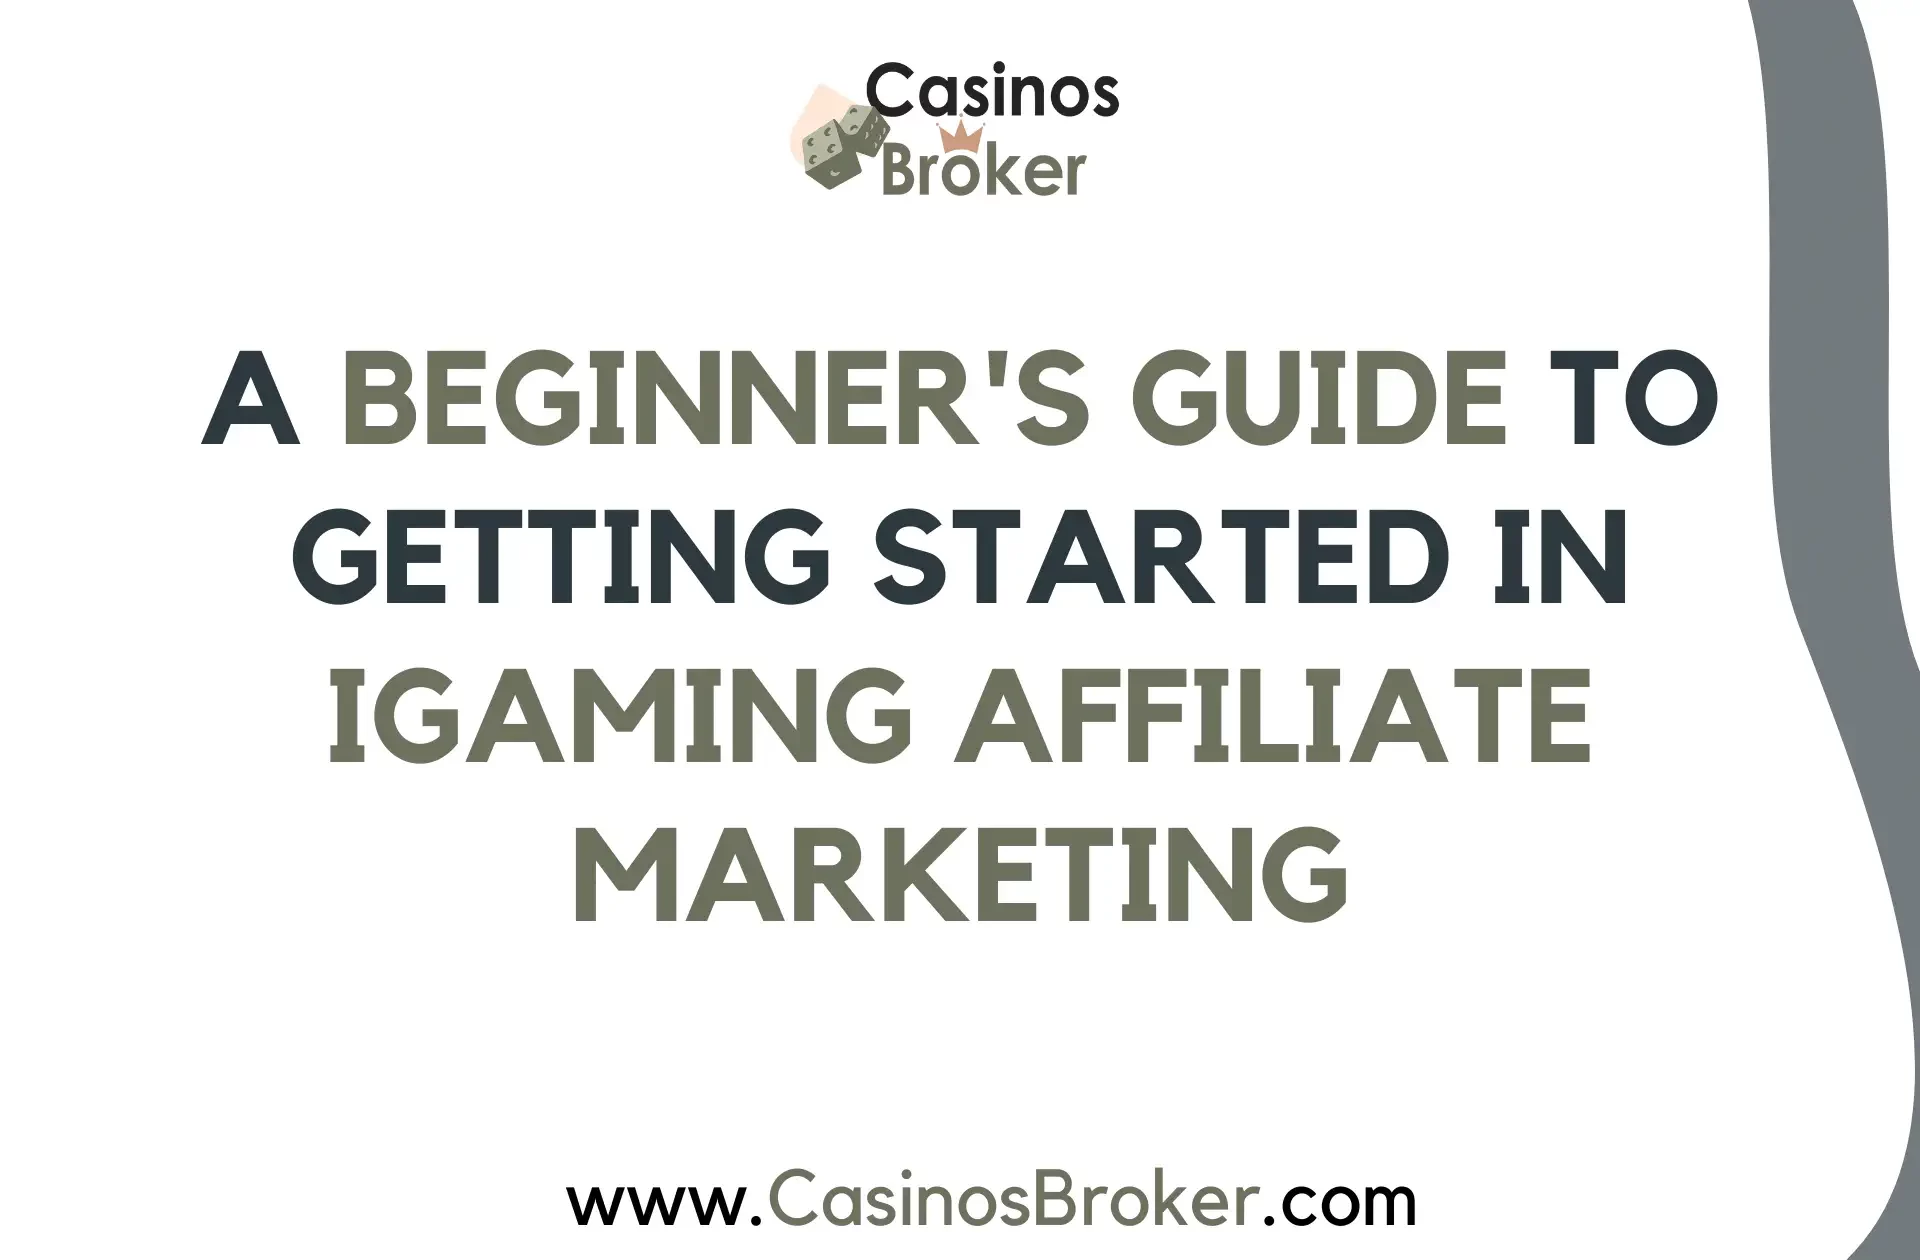 A beginner’s guide to getting started in iGaming affiliate marketing